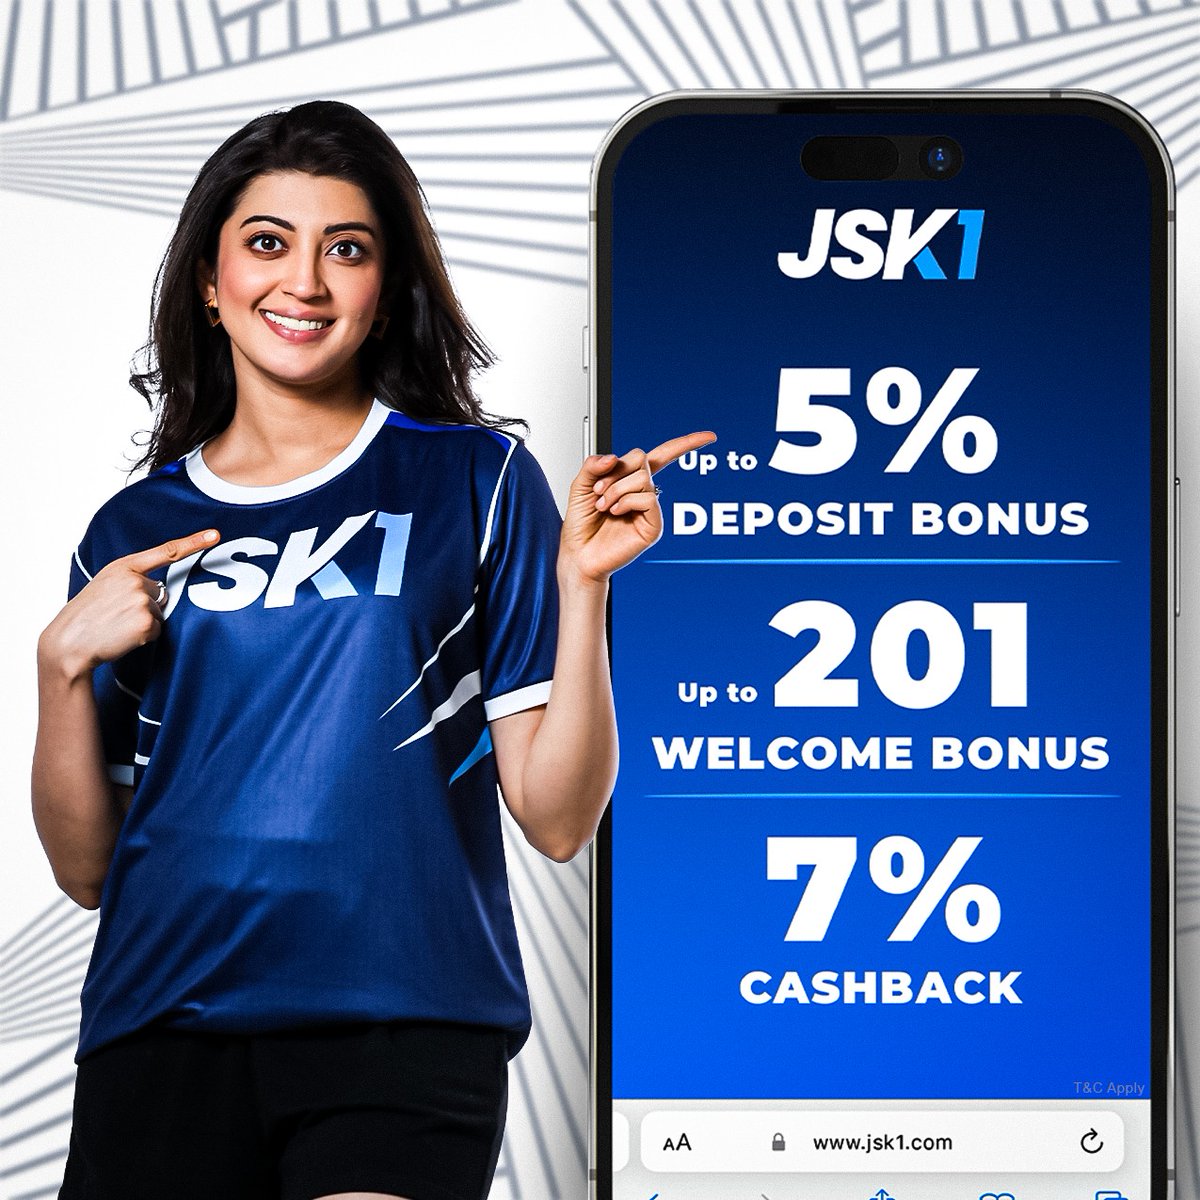 What is the other name of 'happiness'?

We will call it 'Bonuses'

So Join Now and Get Unlimted happiness!

#jsk1 #pranithasubhash #bonus #depositbonus #welcomebonus #cashback #joinnow